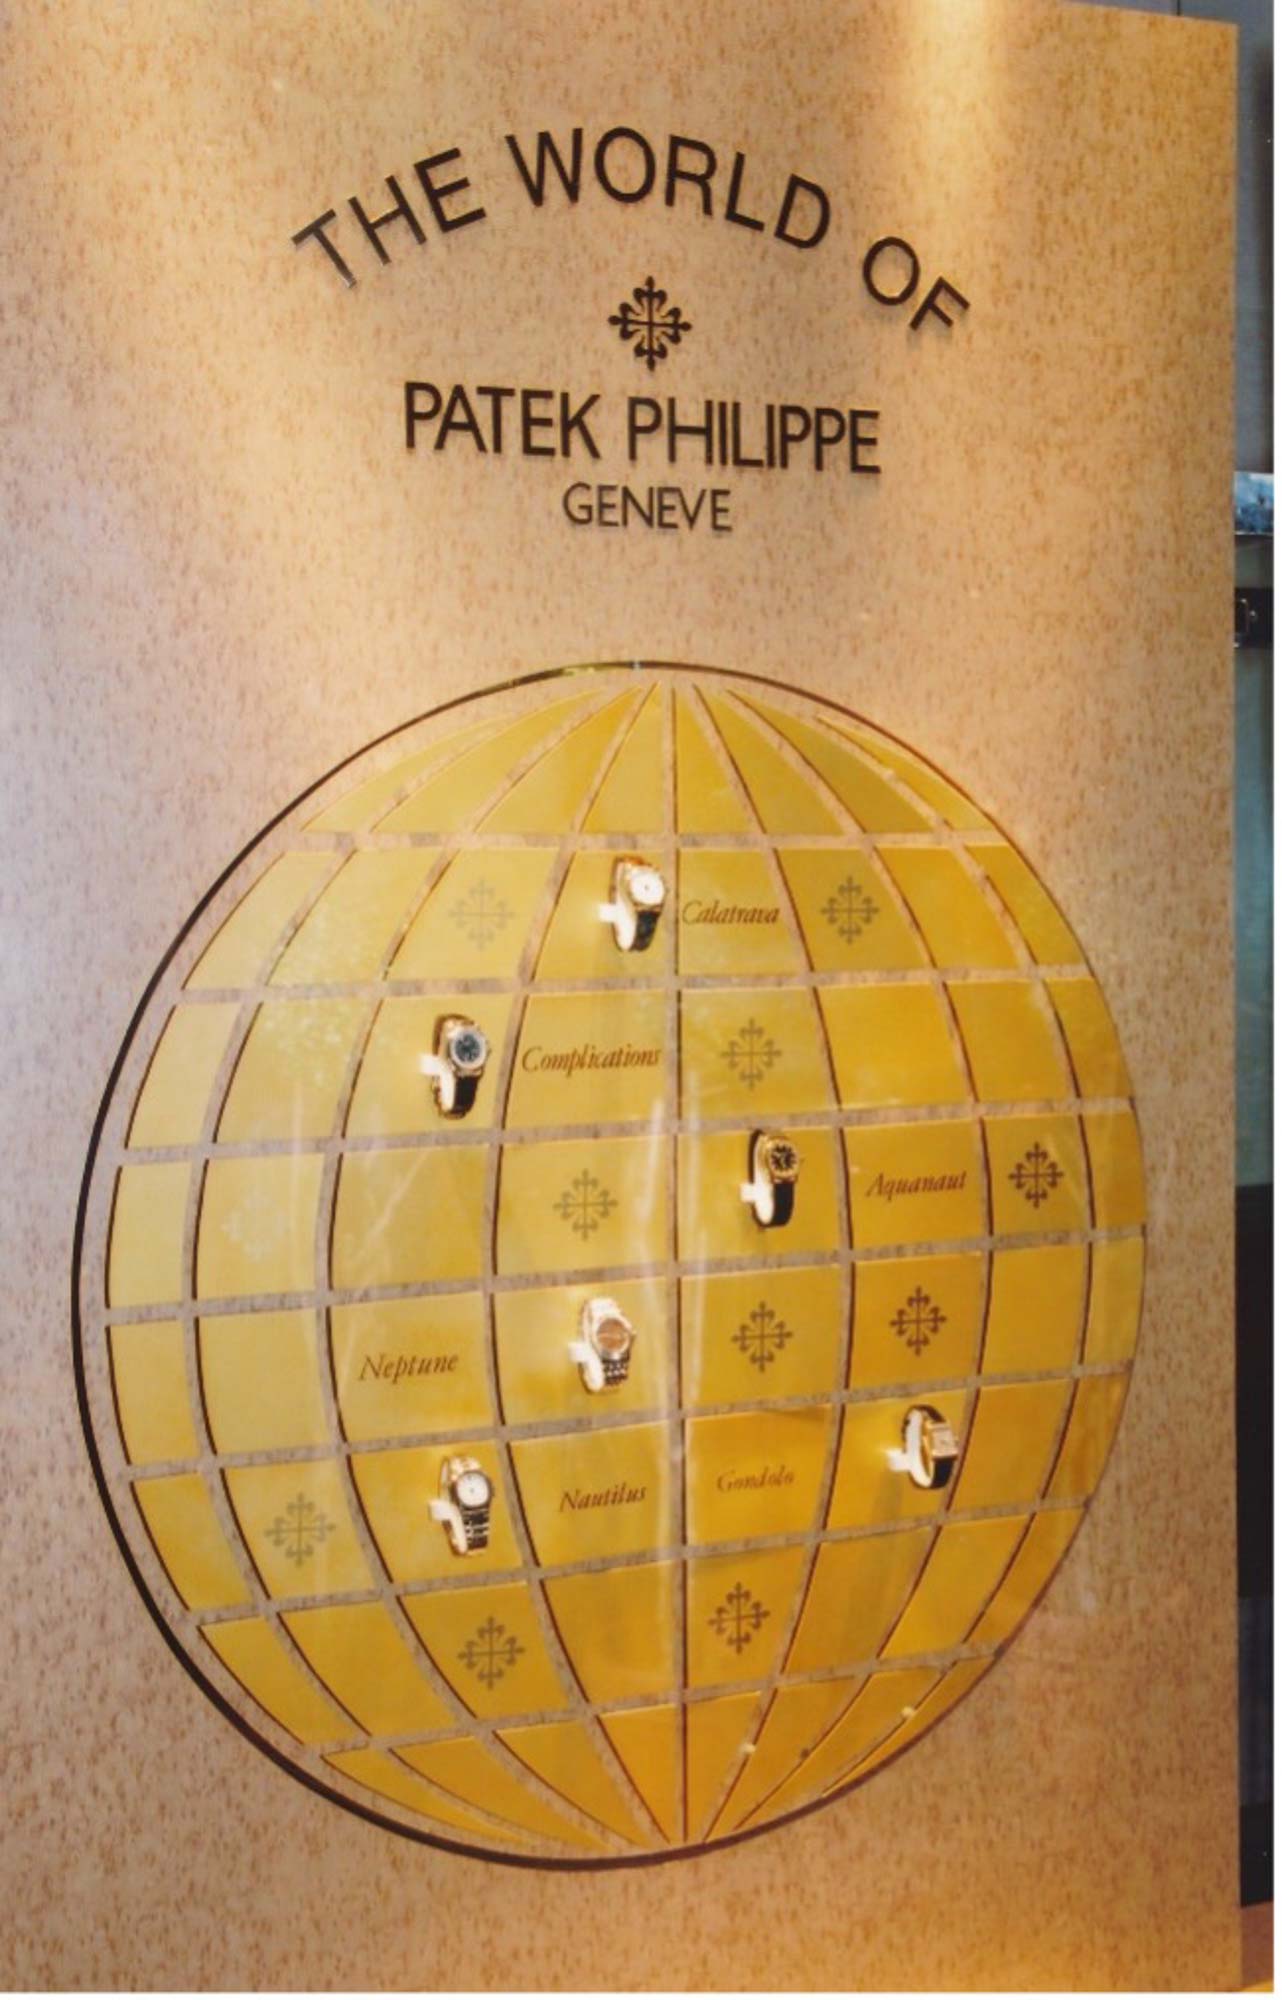 The Aquanaut Has Been An Iconic Collection Of Patek Philippe For Decades. Here's A Display During The Patek Philippe Exhibition Held With The Hour Glass In 2000 In Singapore.